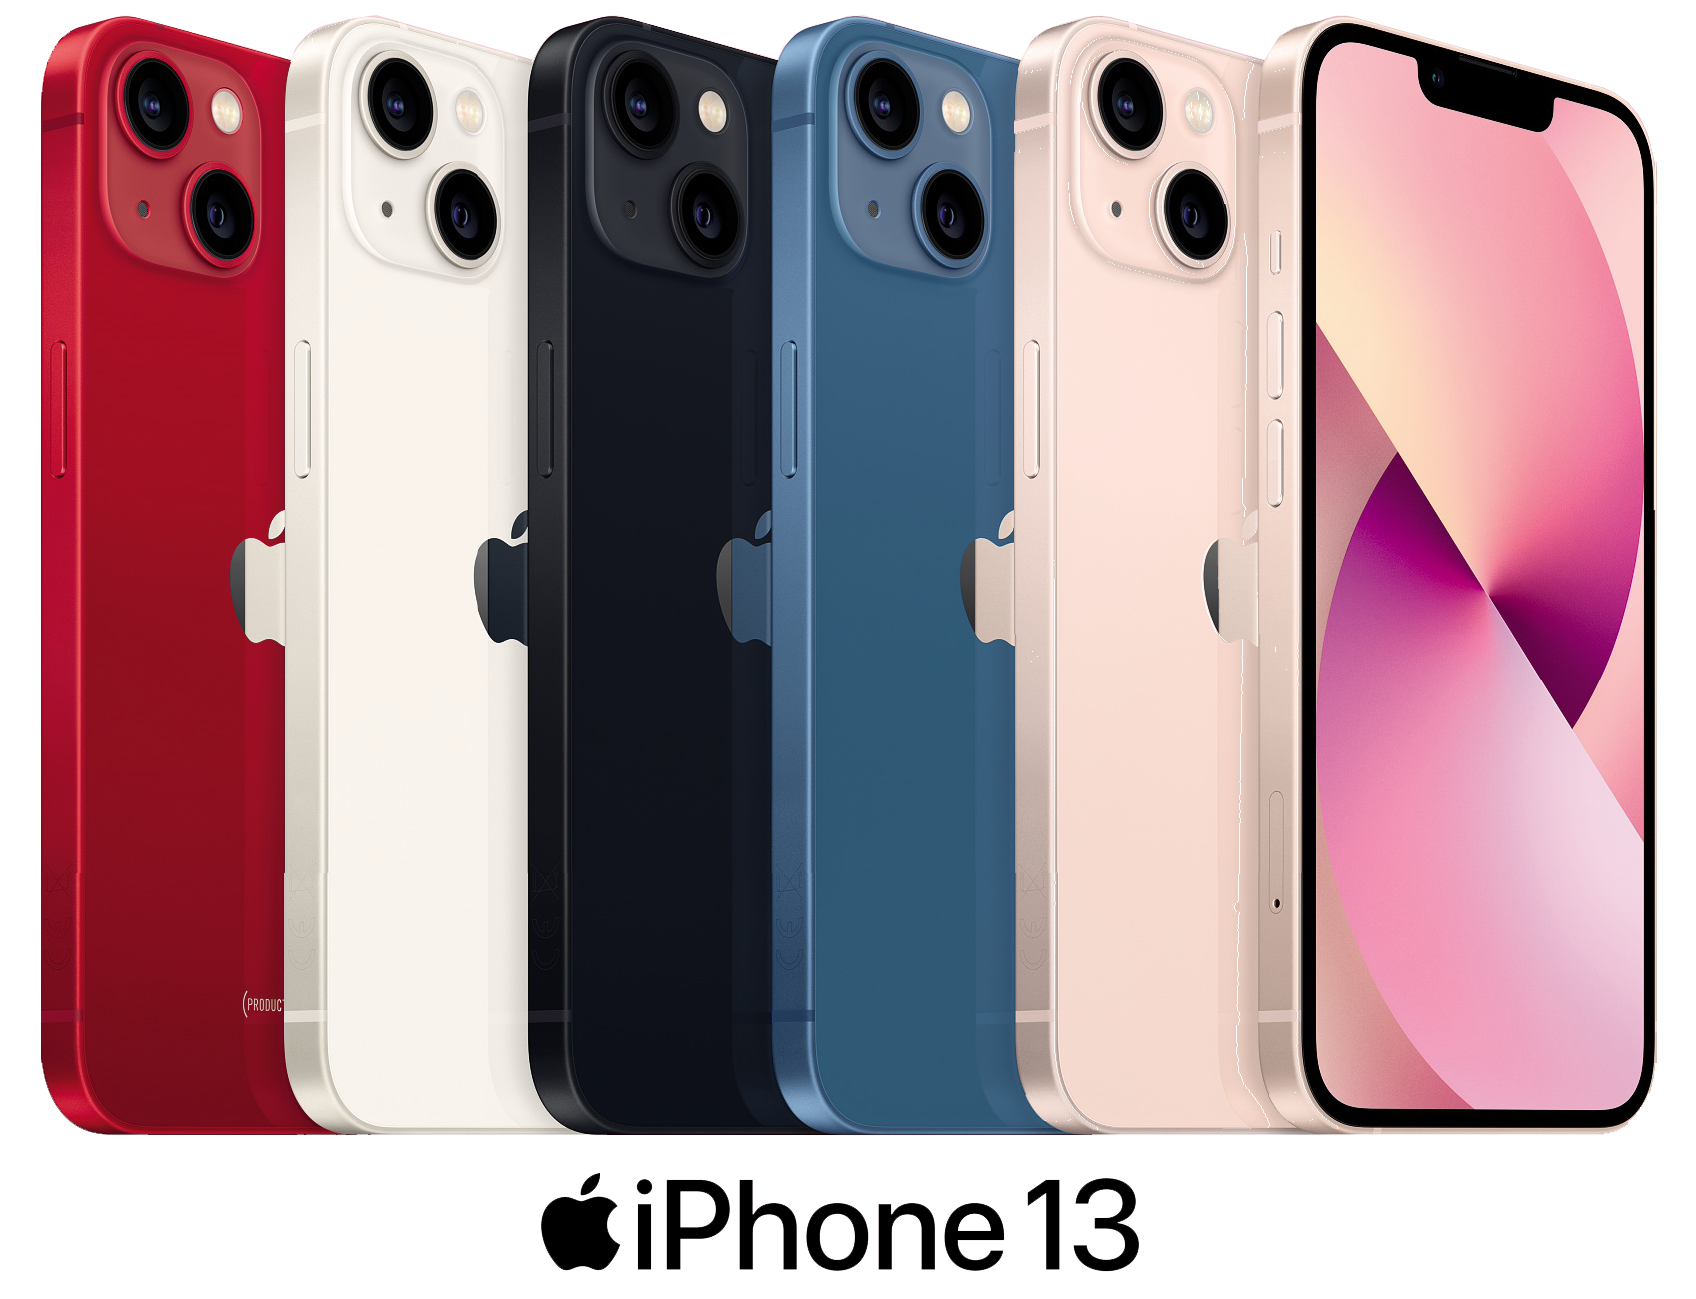 iPhone 13 in all its colours.